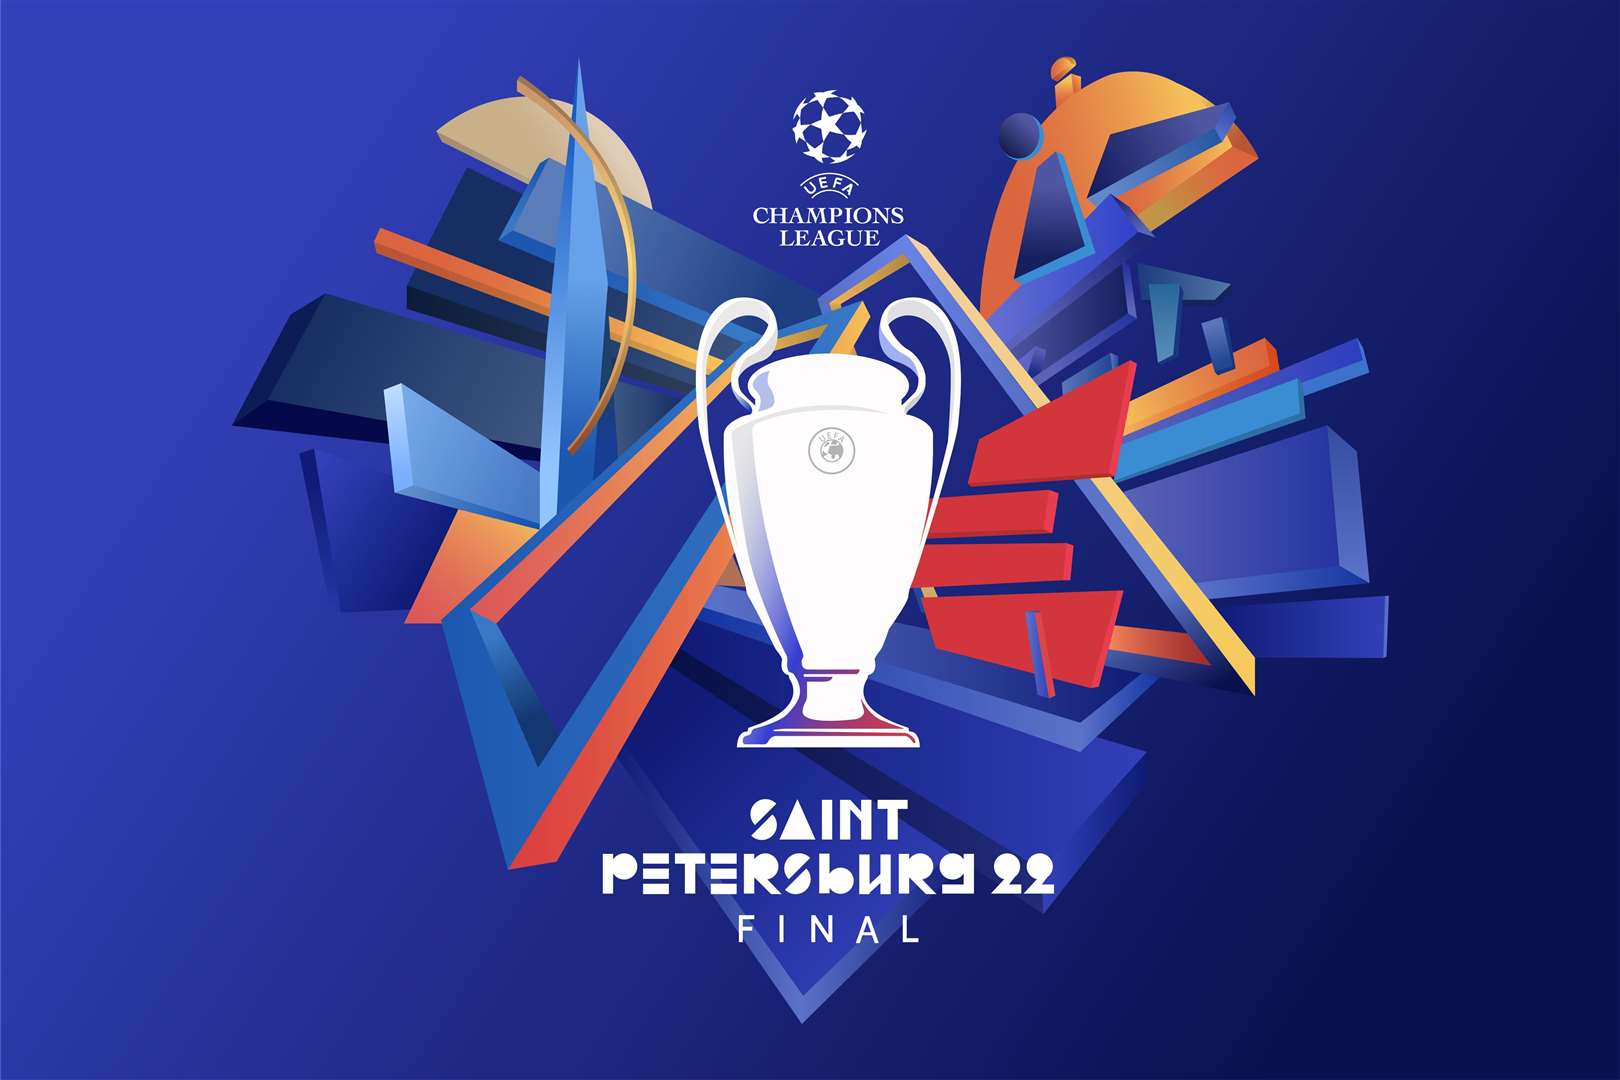 It seems inevitable that the 2022 Champions League final will be moved away from St Petersburg, with a decision expected on Friday.